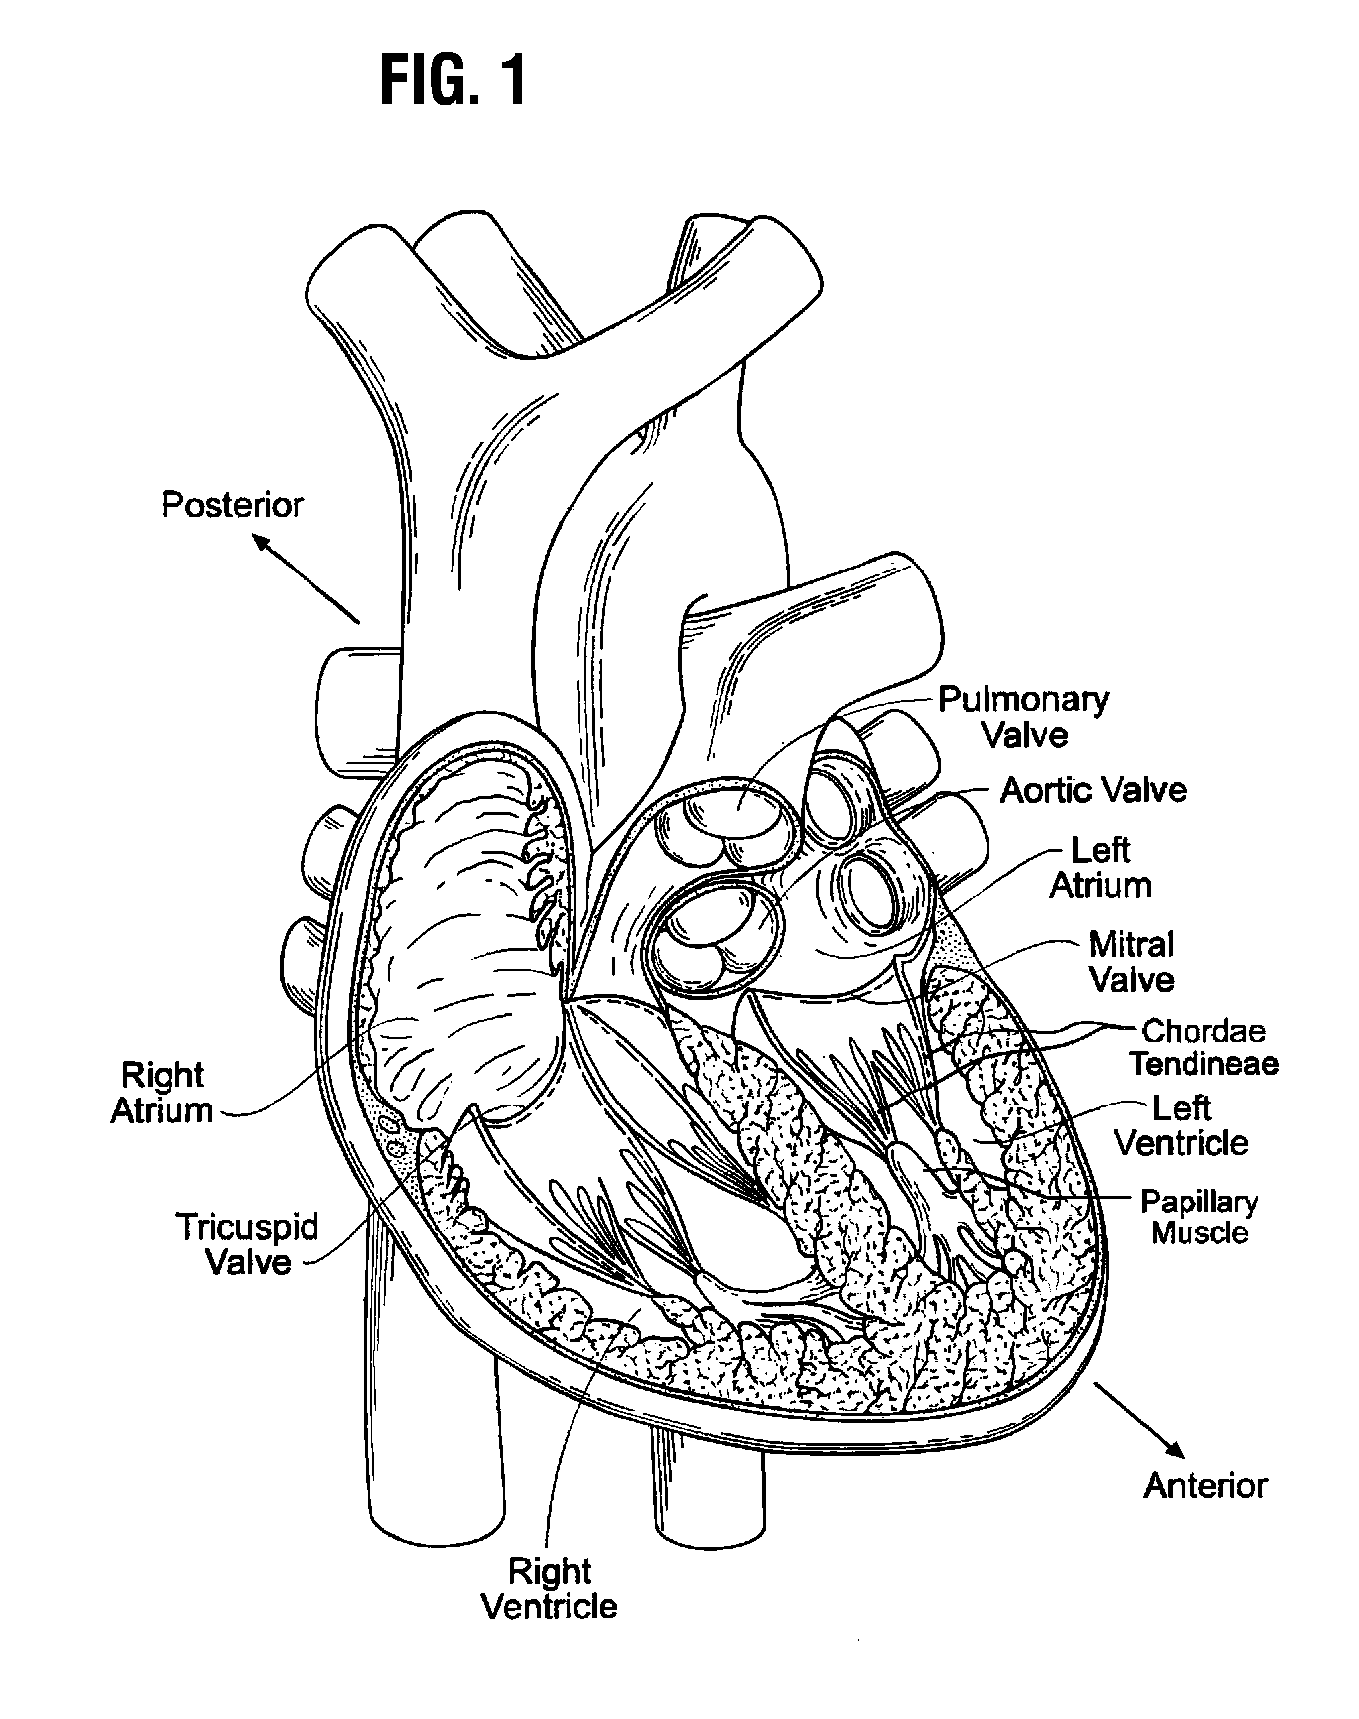 Systems for rapidly deploying surgical heart valves